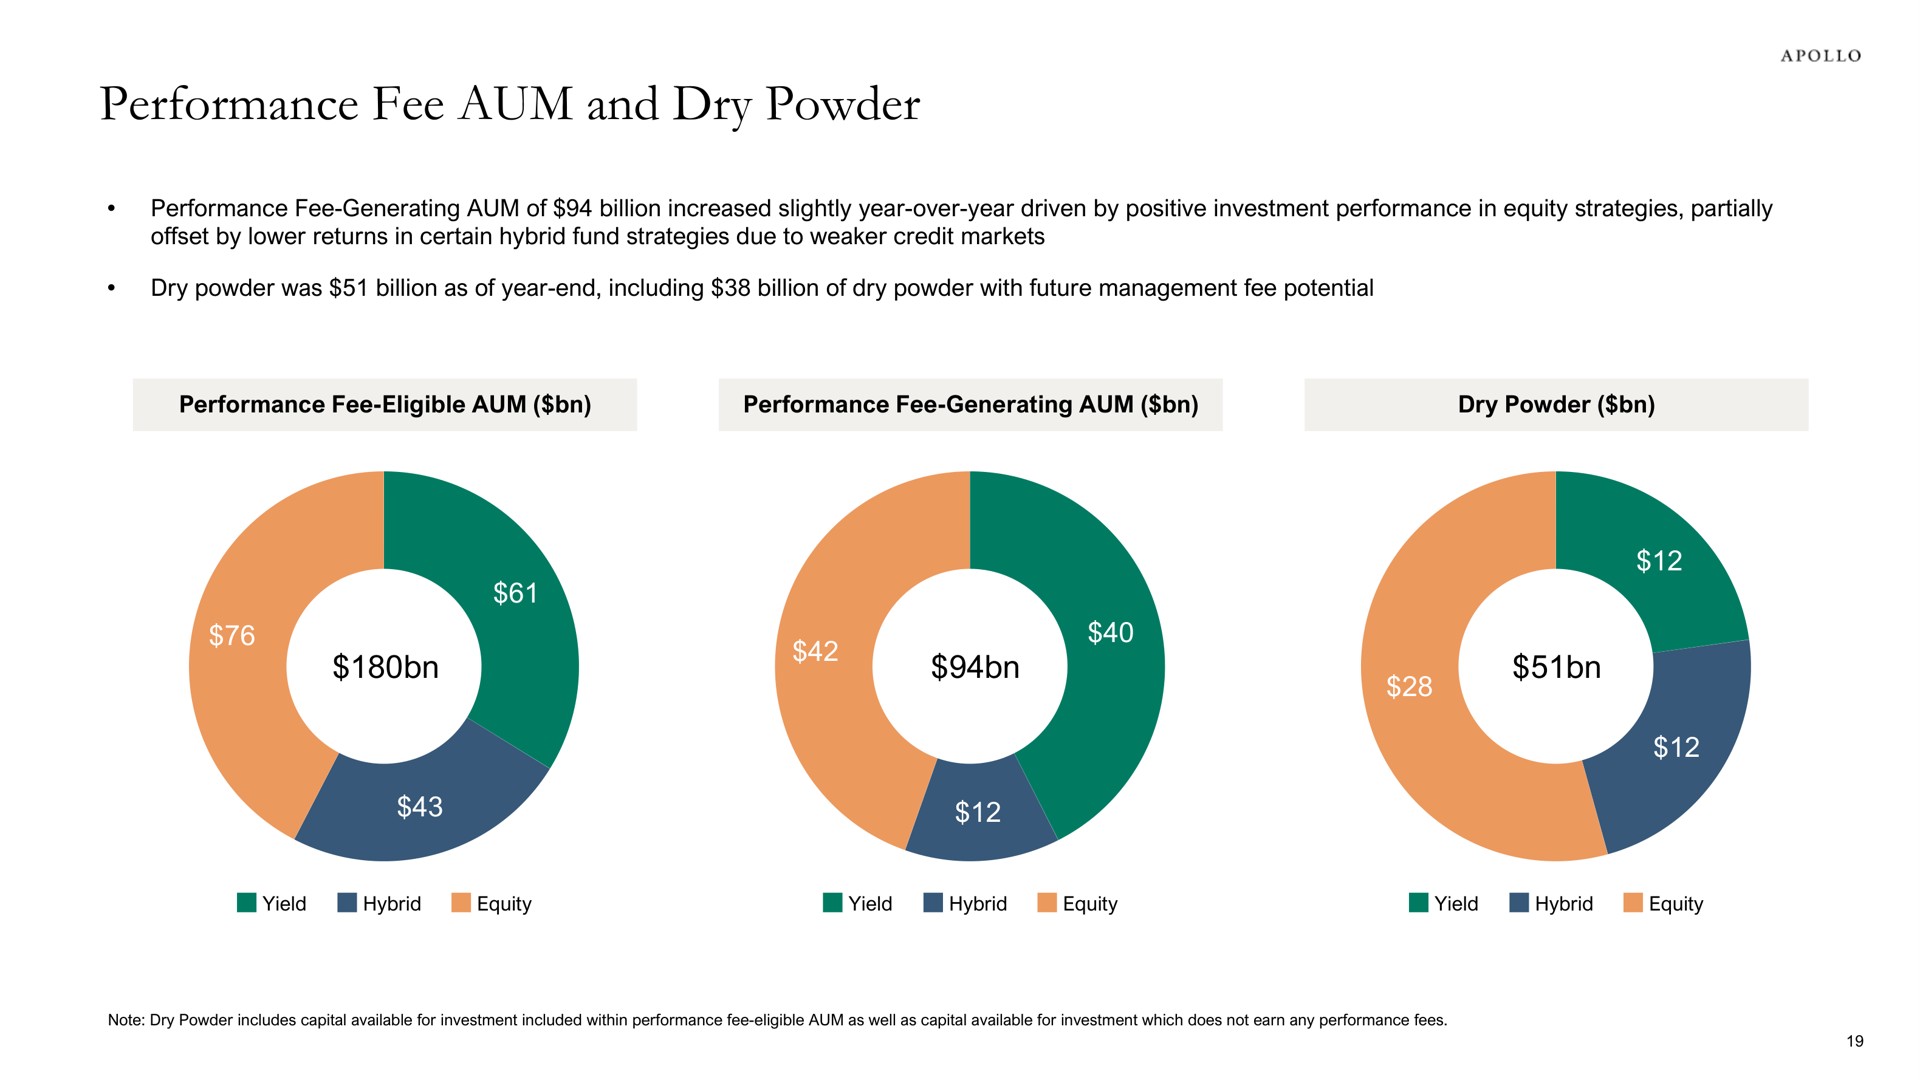 performance fee aum and dry powder | Apollo Global Management